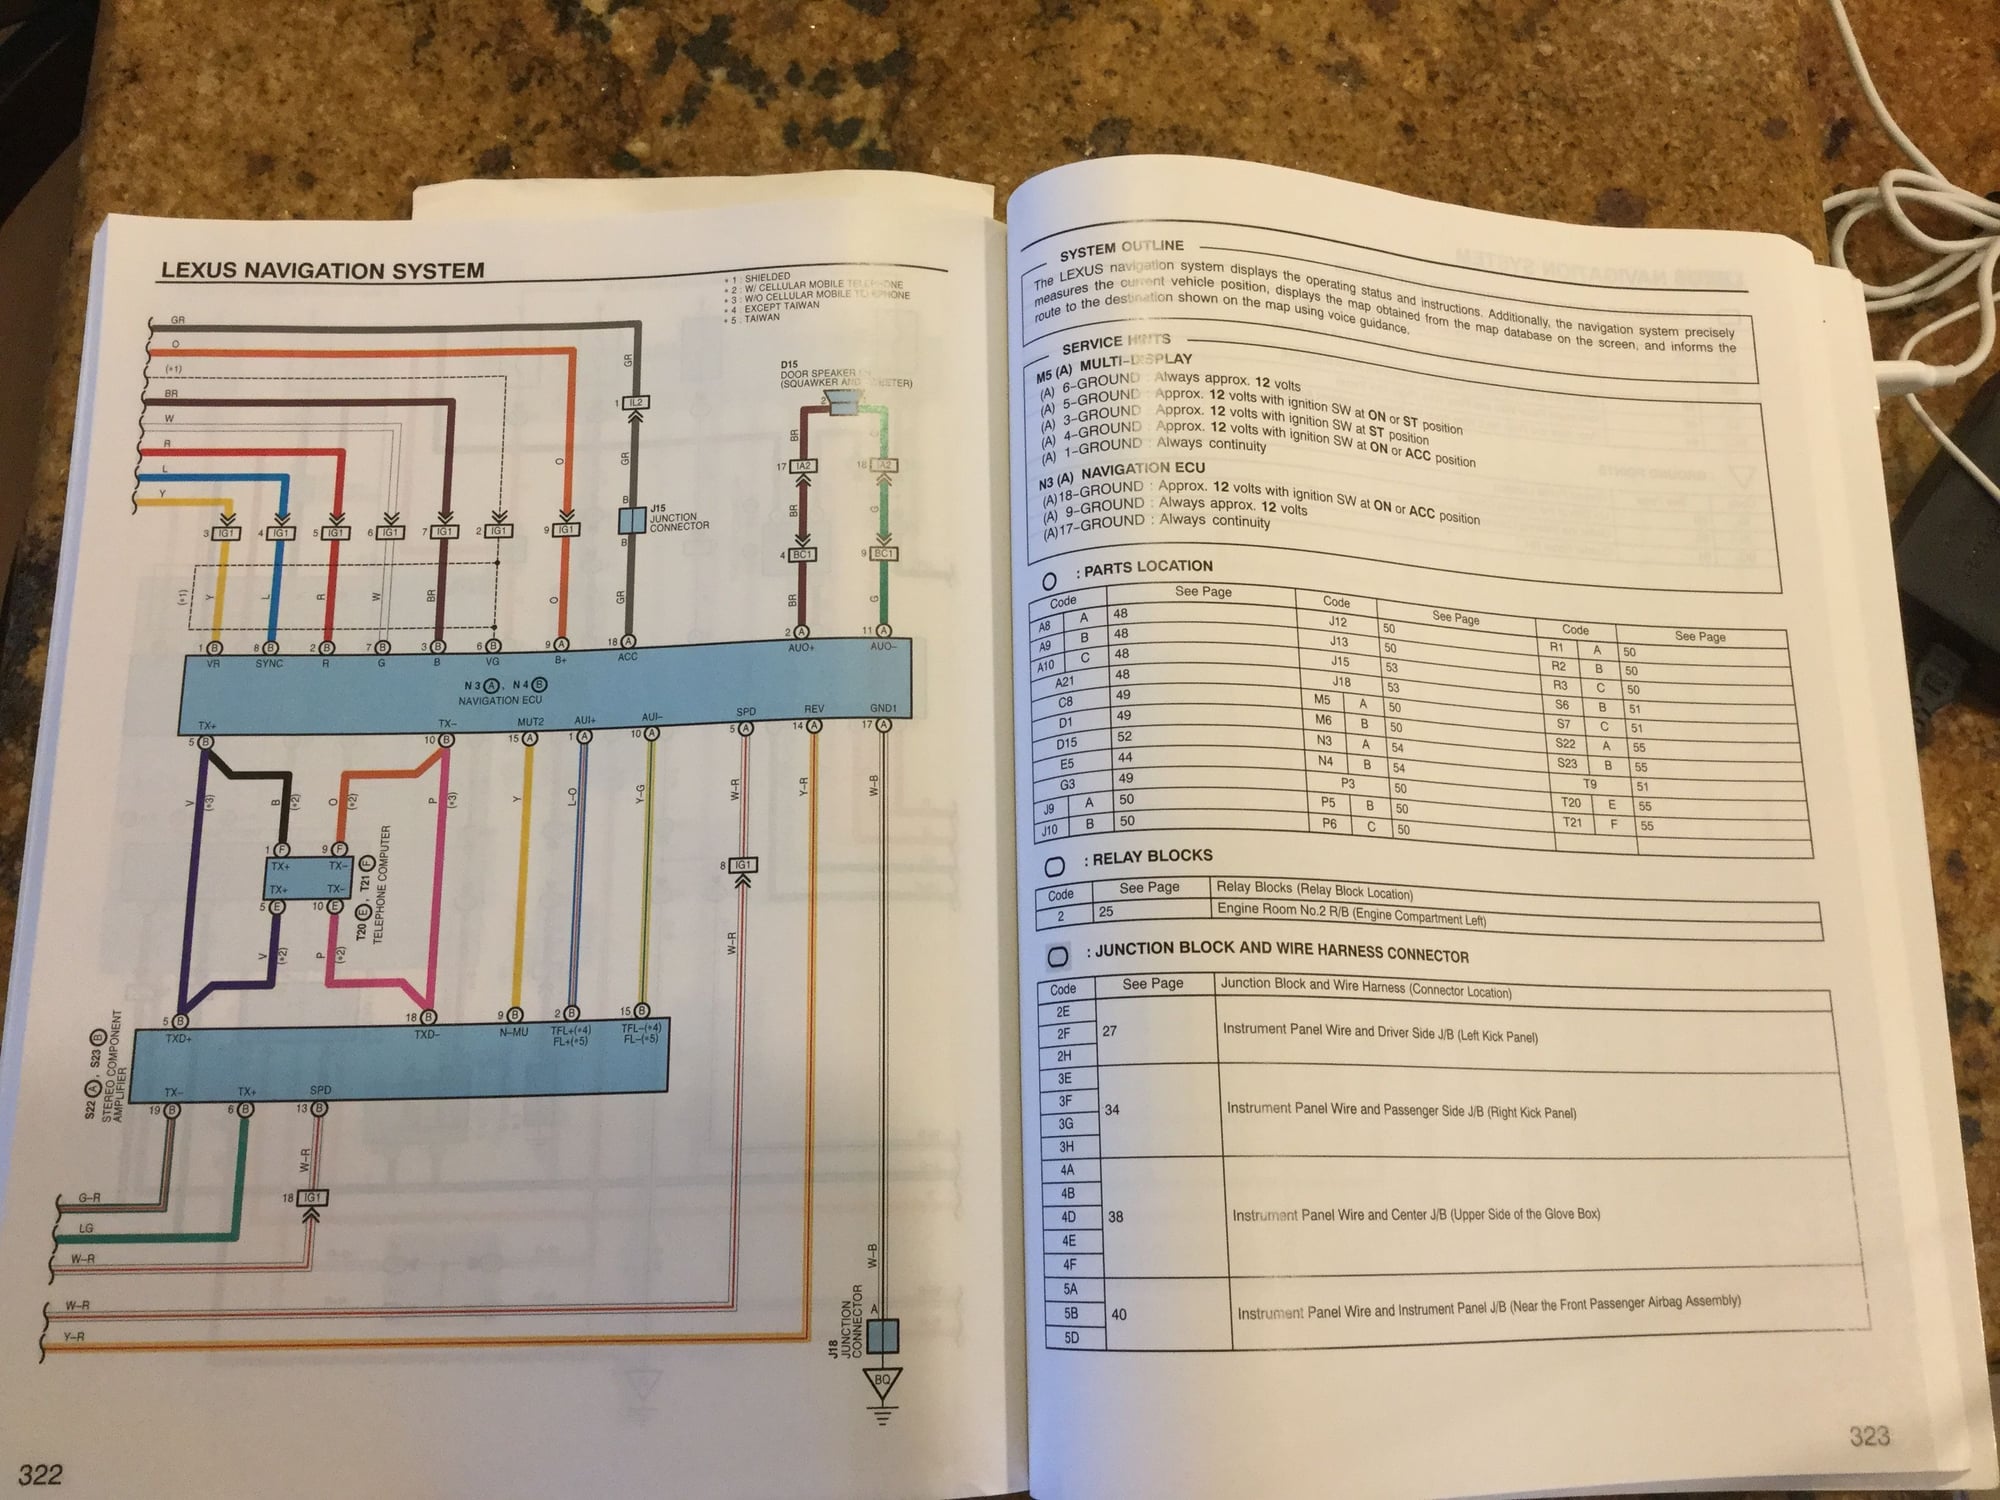 Wiring diagram for stereo wires? - ClubLexus - Lexus Forum Discussion